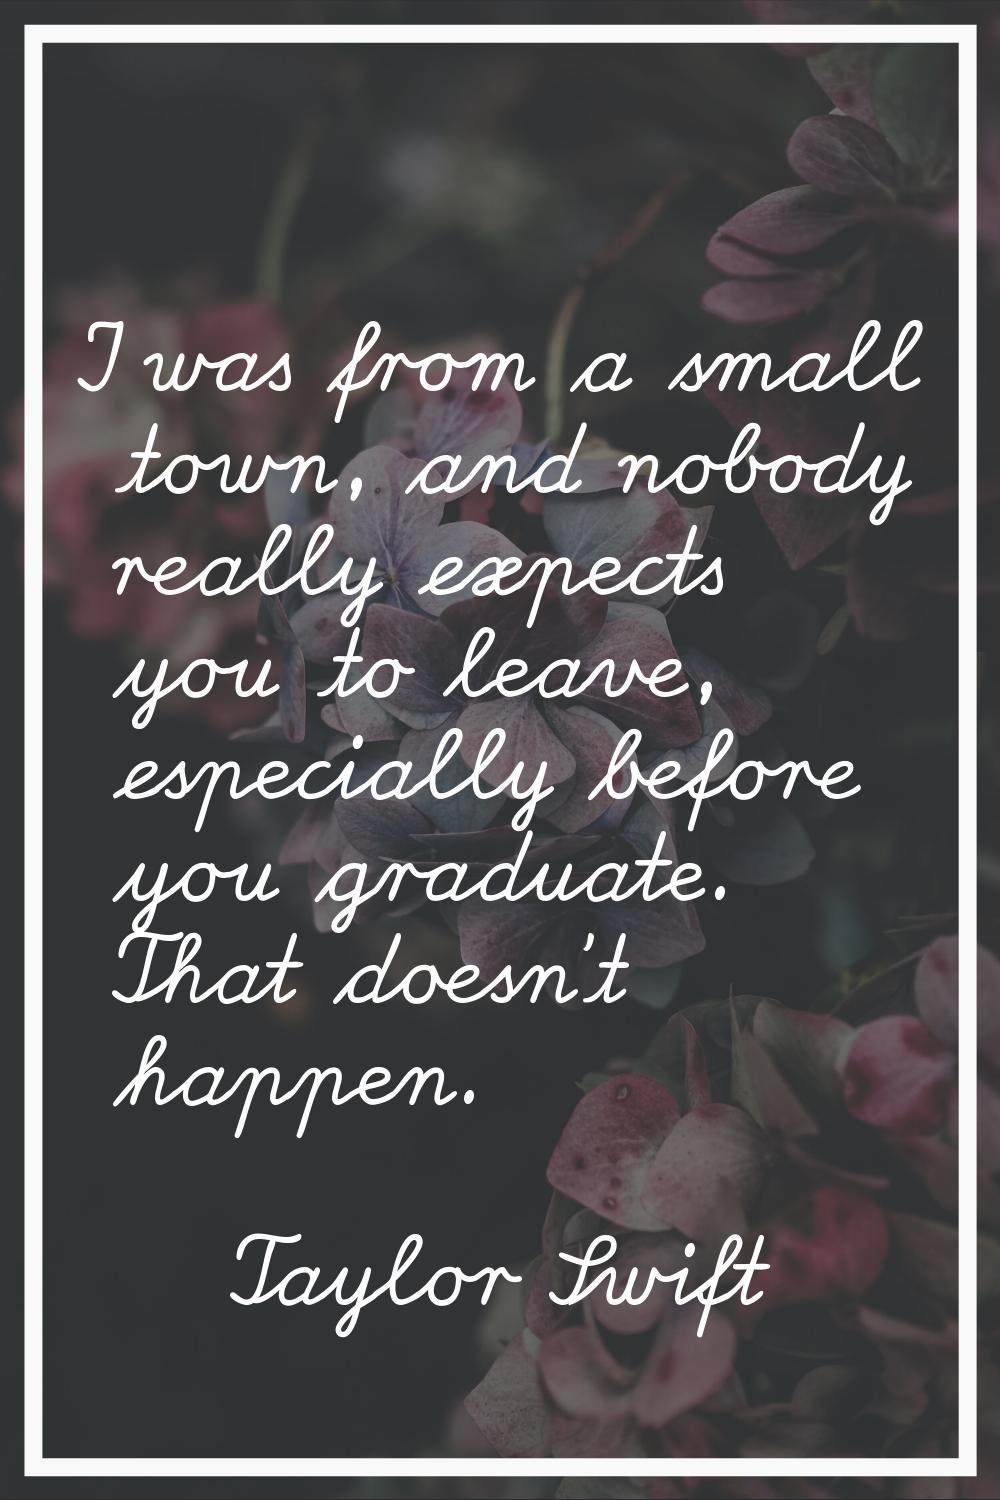 I was from a small town, and nobody really expects you to leave, especially before you graduate. Th